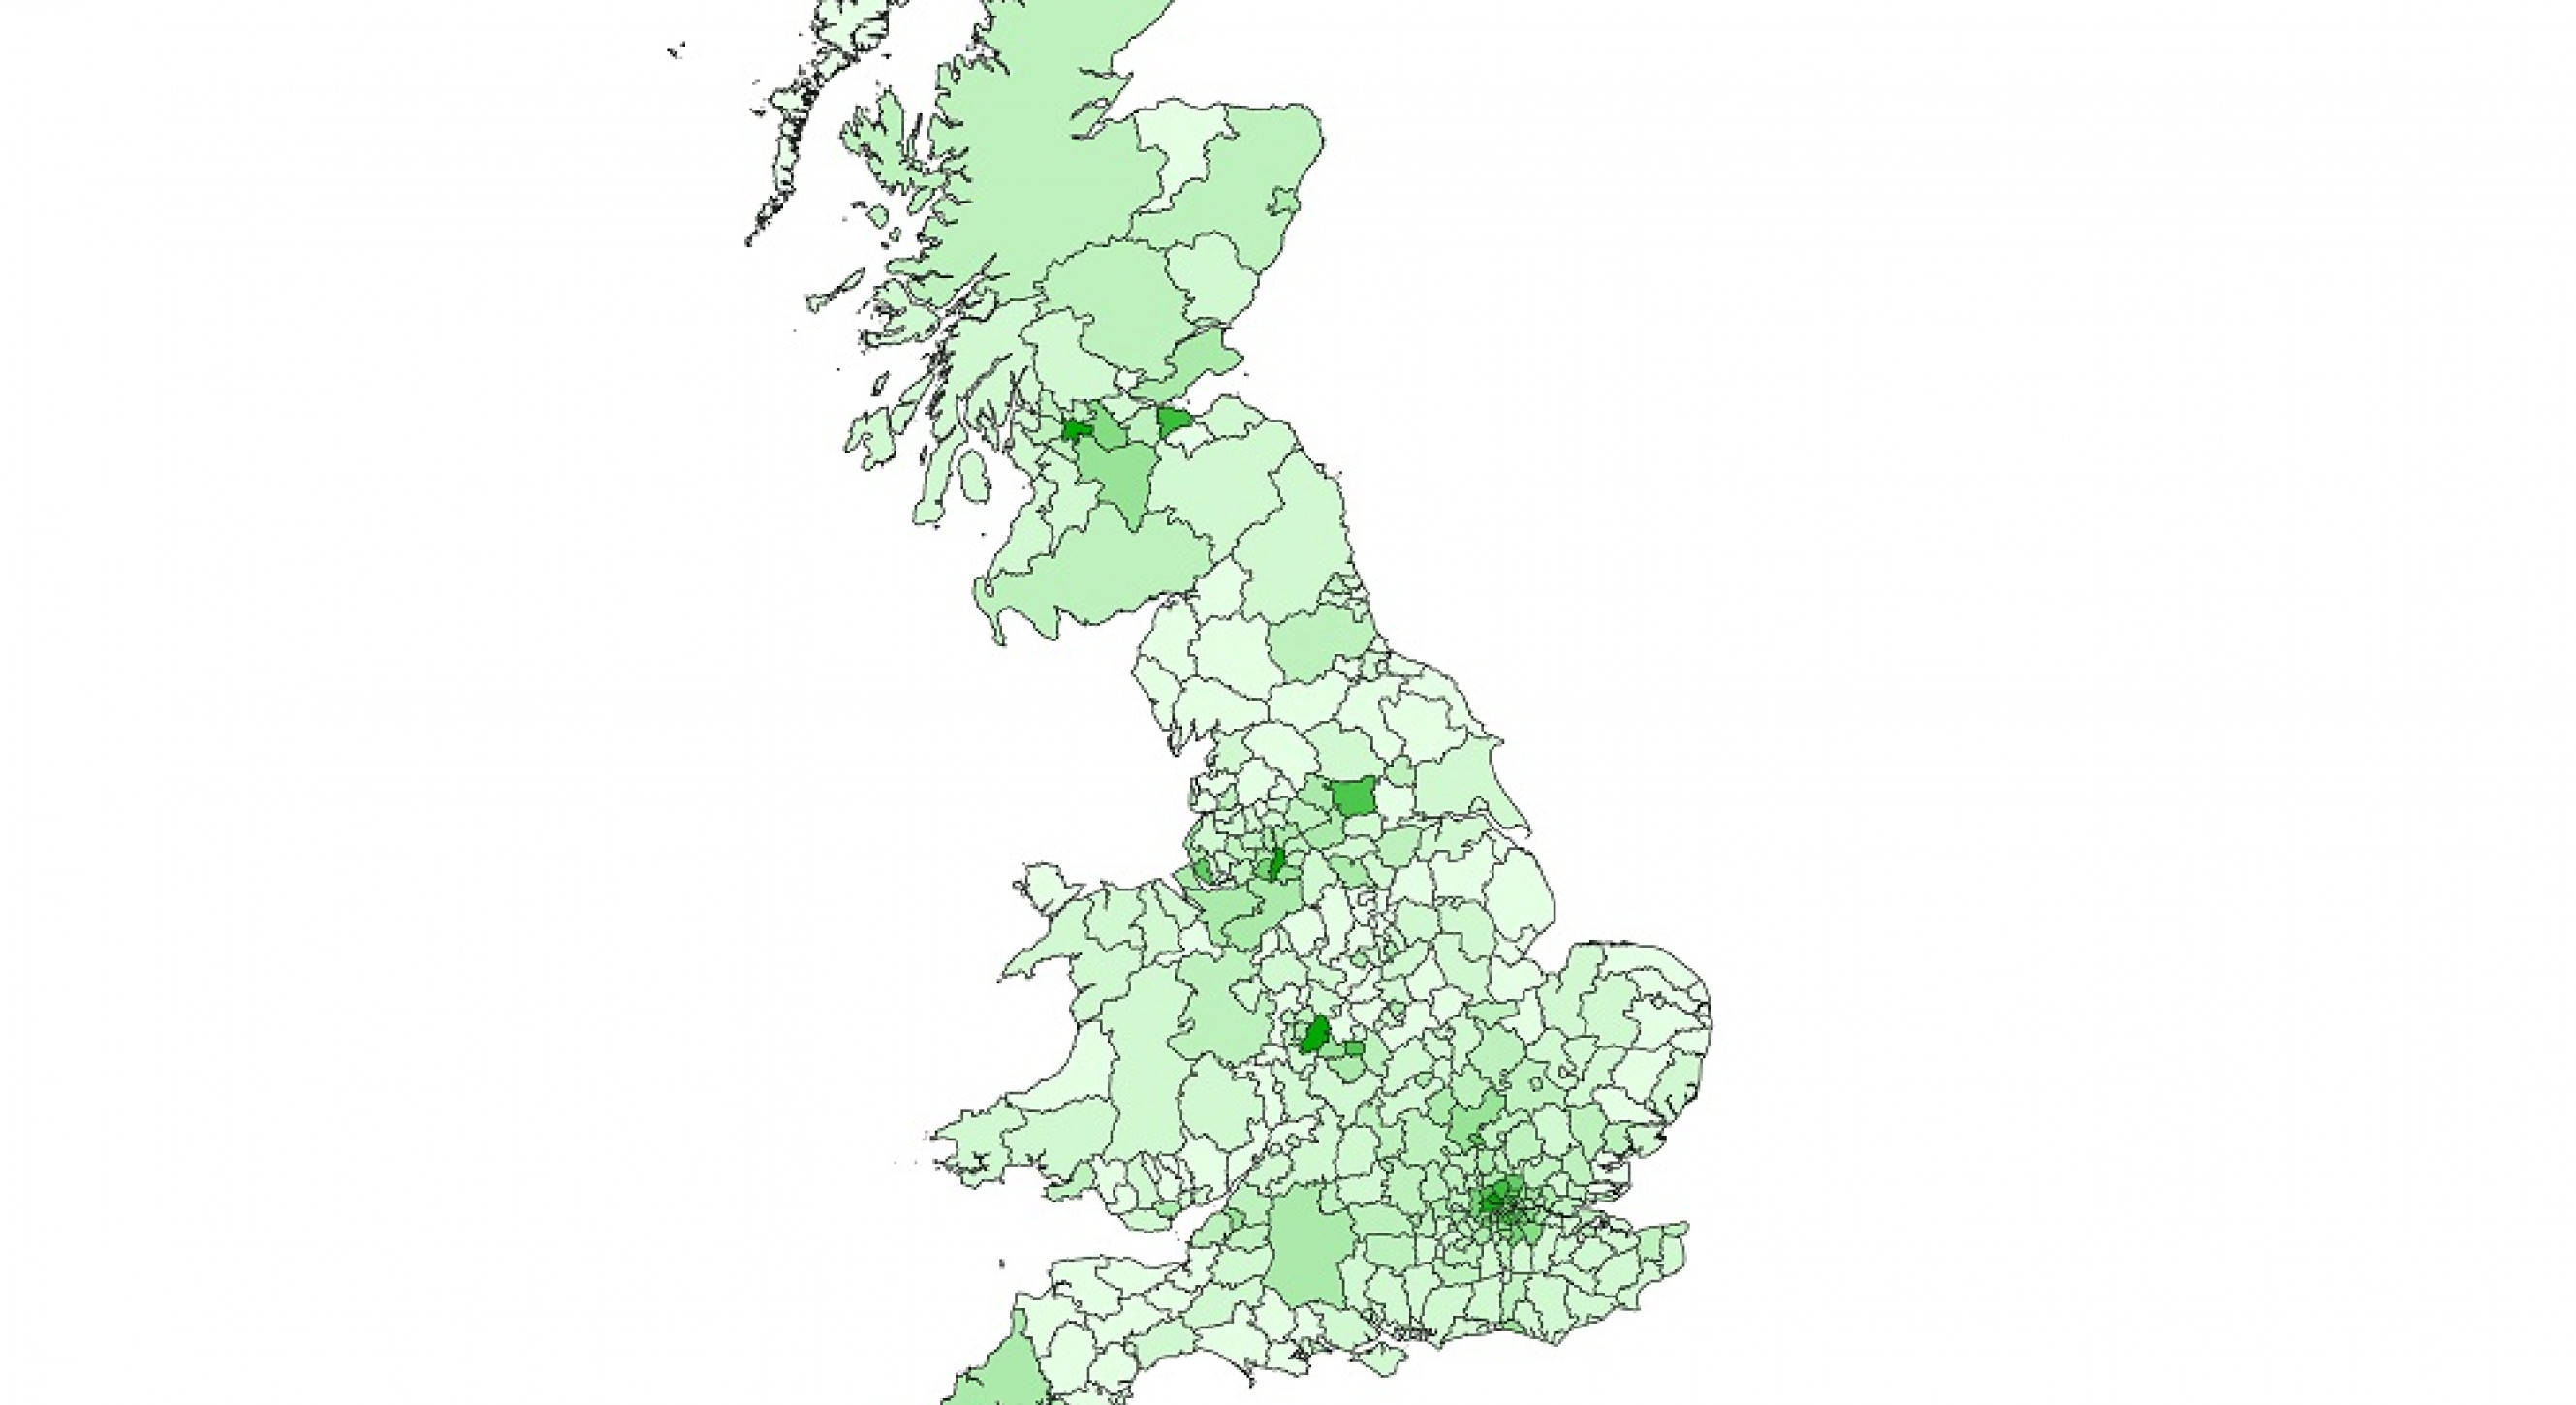 White Irish across local authorities (right click to open image in new tab)